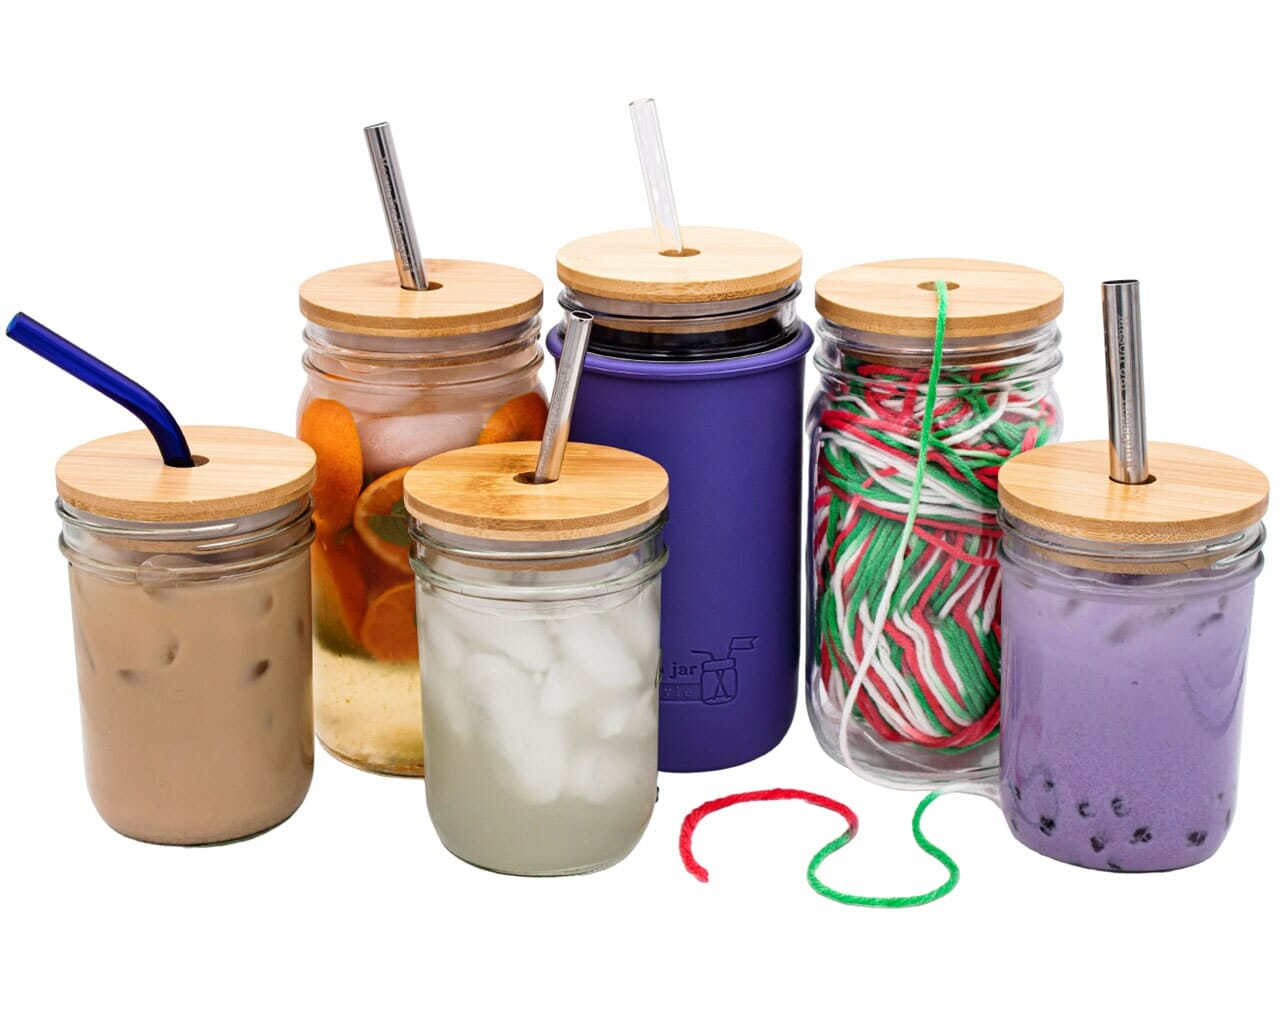 mason-jar-lifestyle-bamboo-straw-hole-tumbler-lids-wide-mouth-stainless-steel-glass-bent-safer-smoothie-boba-straw-ultra-violet-24oz-silicone-sleeve-iced-tea-water-coffee-string